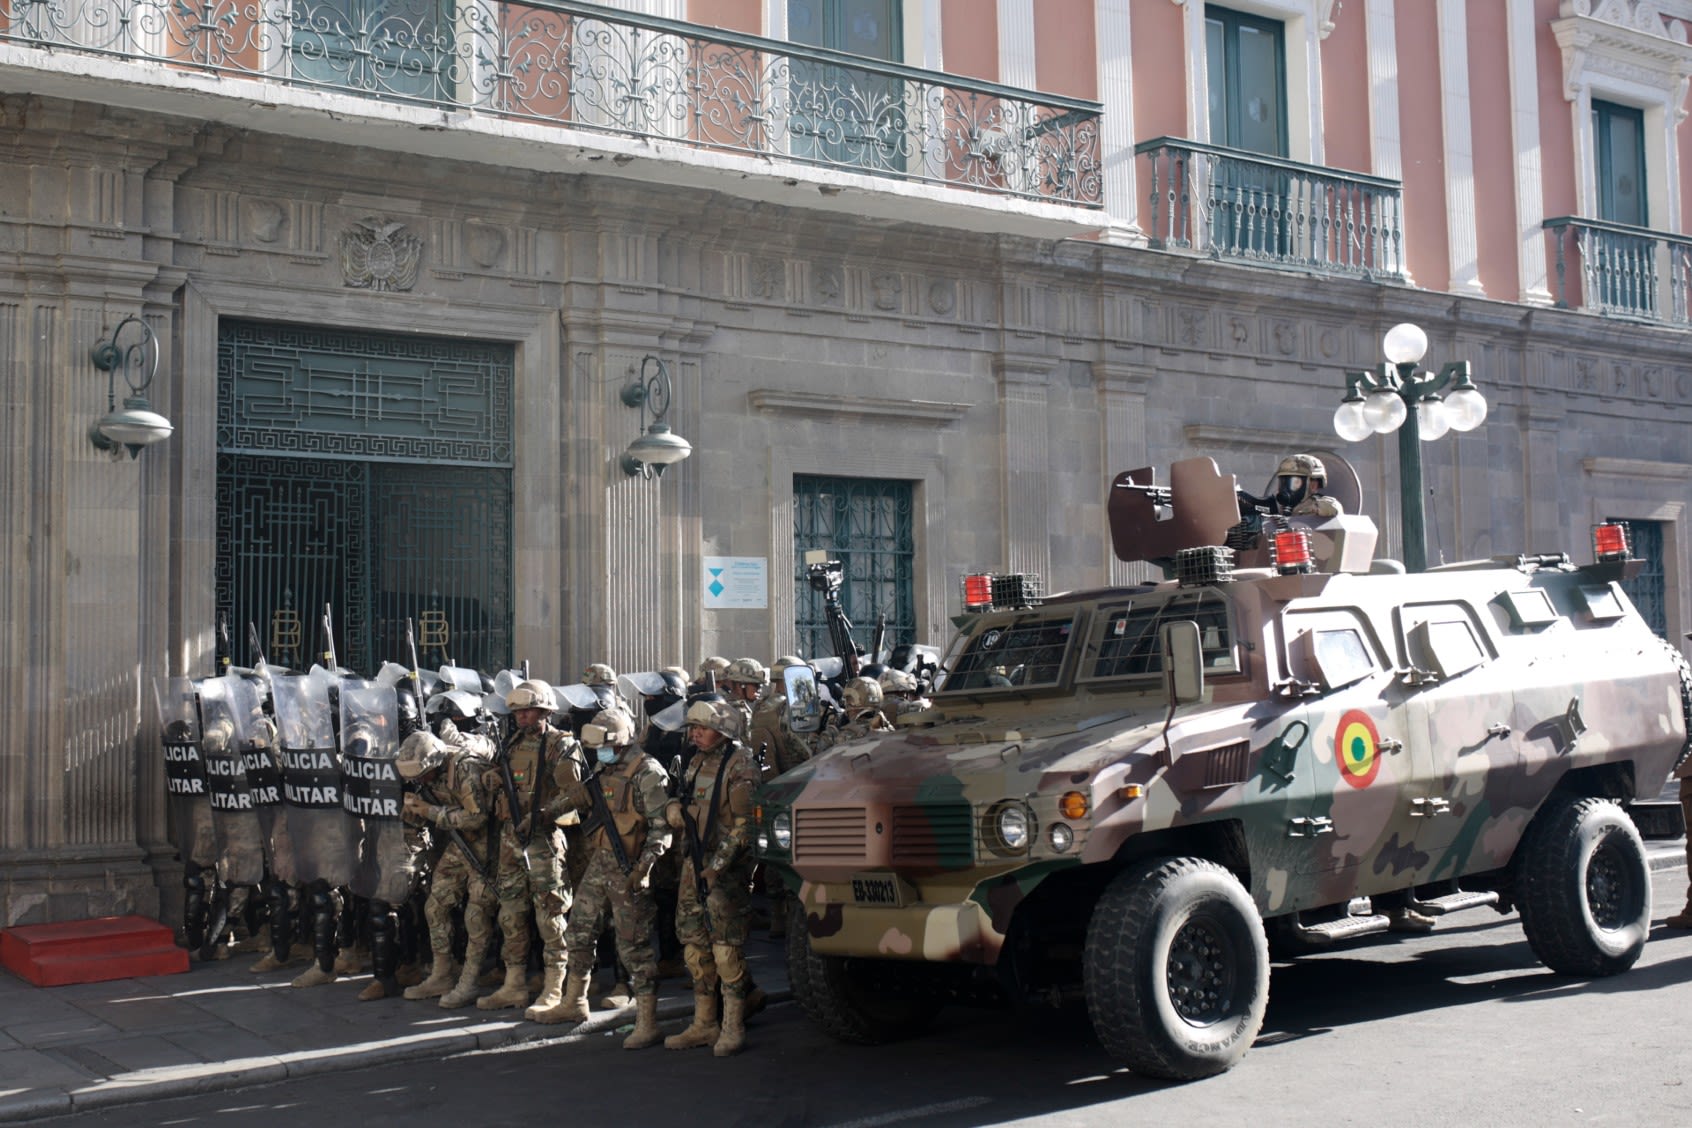 "Democracy must be respected": Assault on Bolivia's presidential palace fails